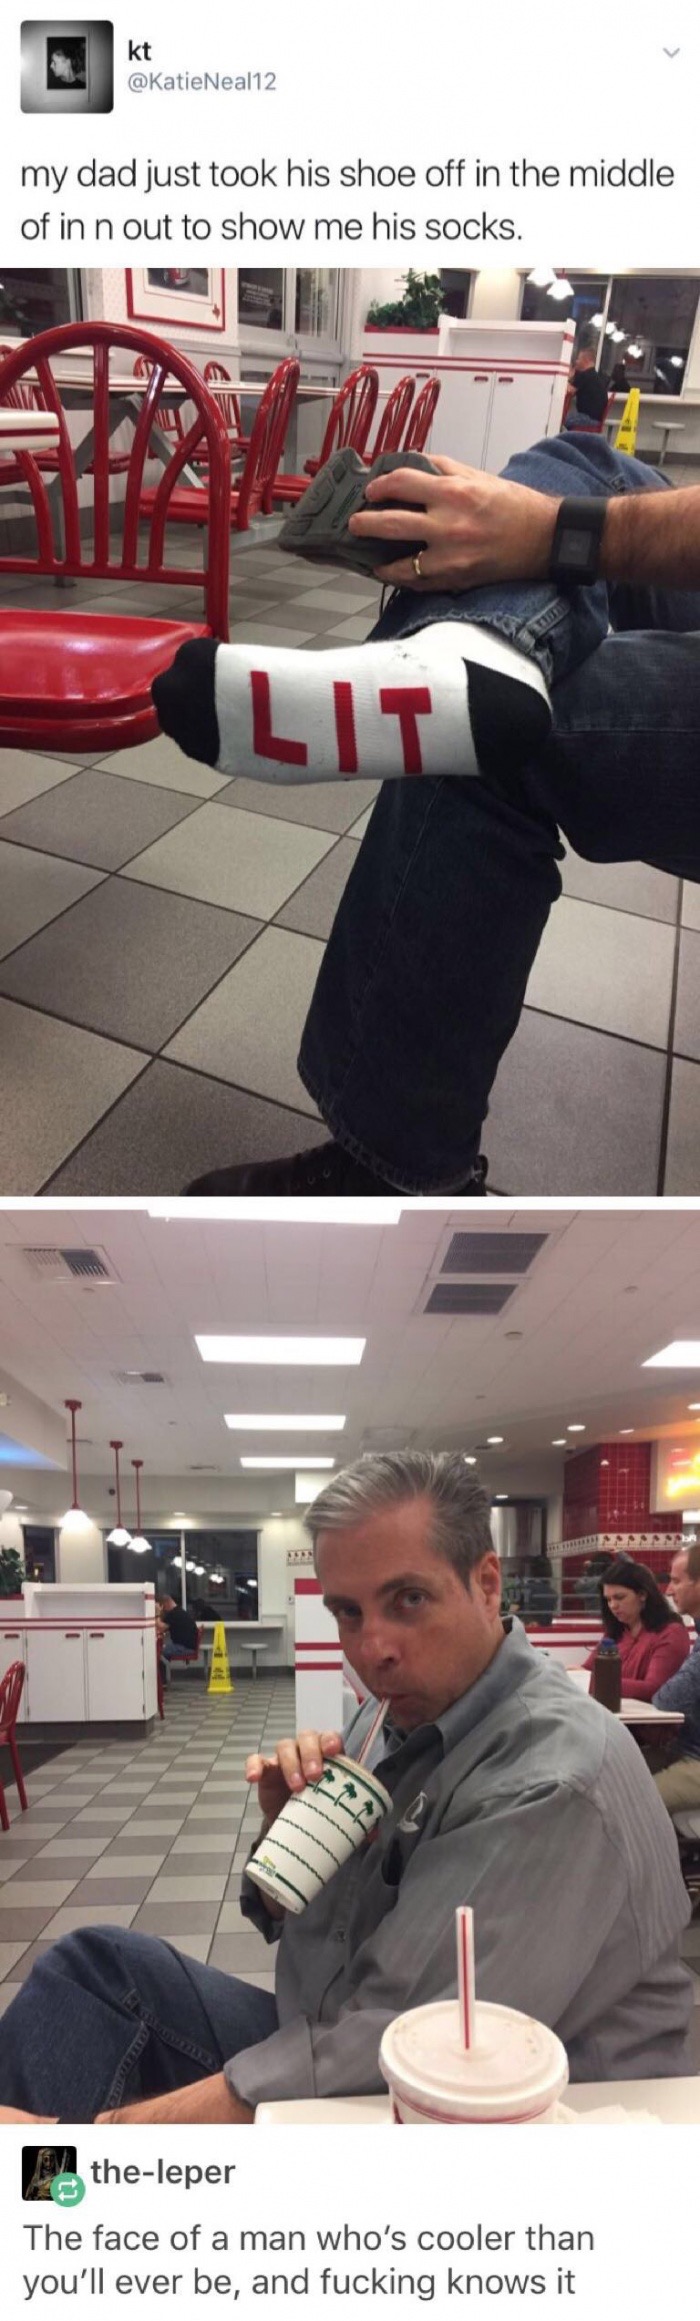 Shoe - kt my dad just took his shoe off in the middle of in n out to show me his socks. theleper The face of a man who's cooler than you'll ever be, and fucking knows it